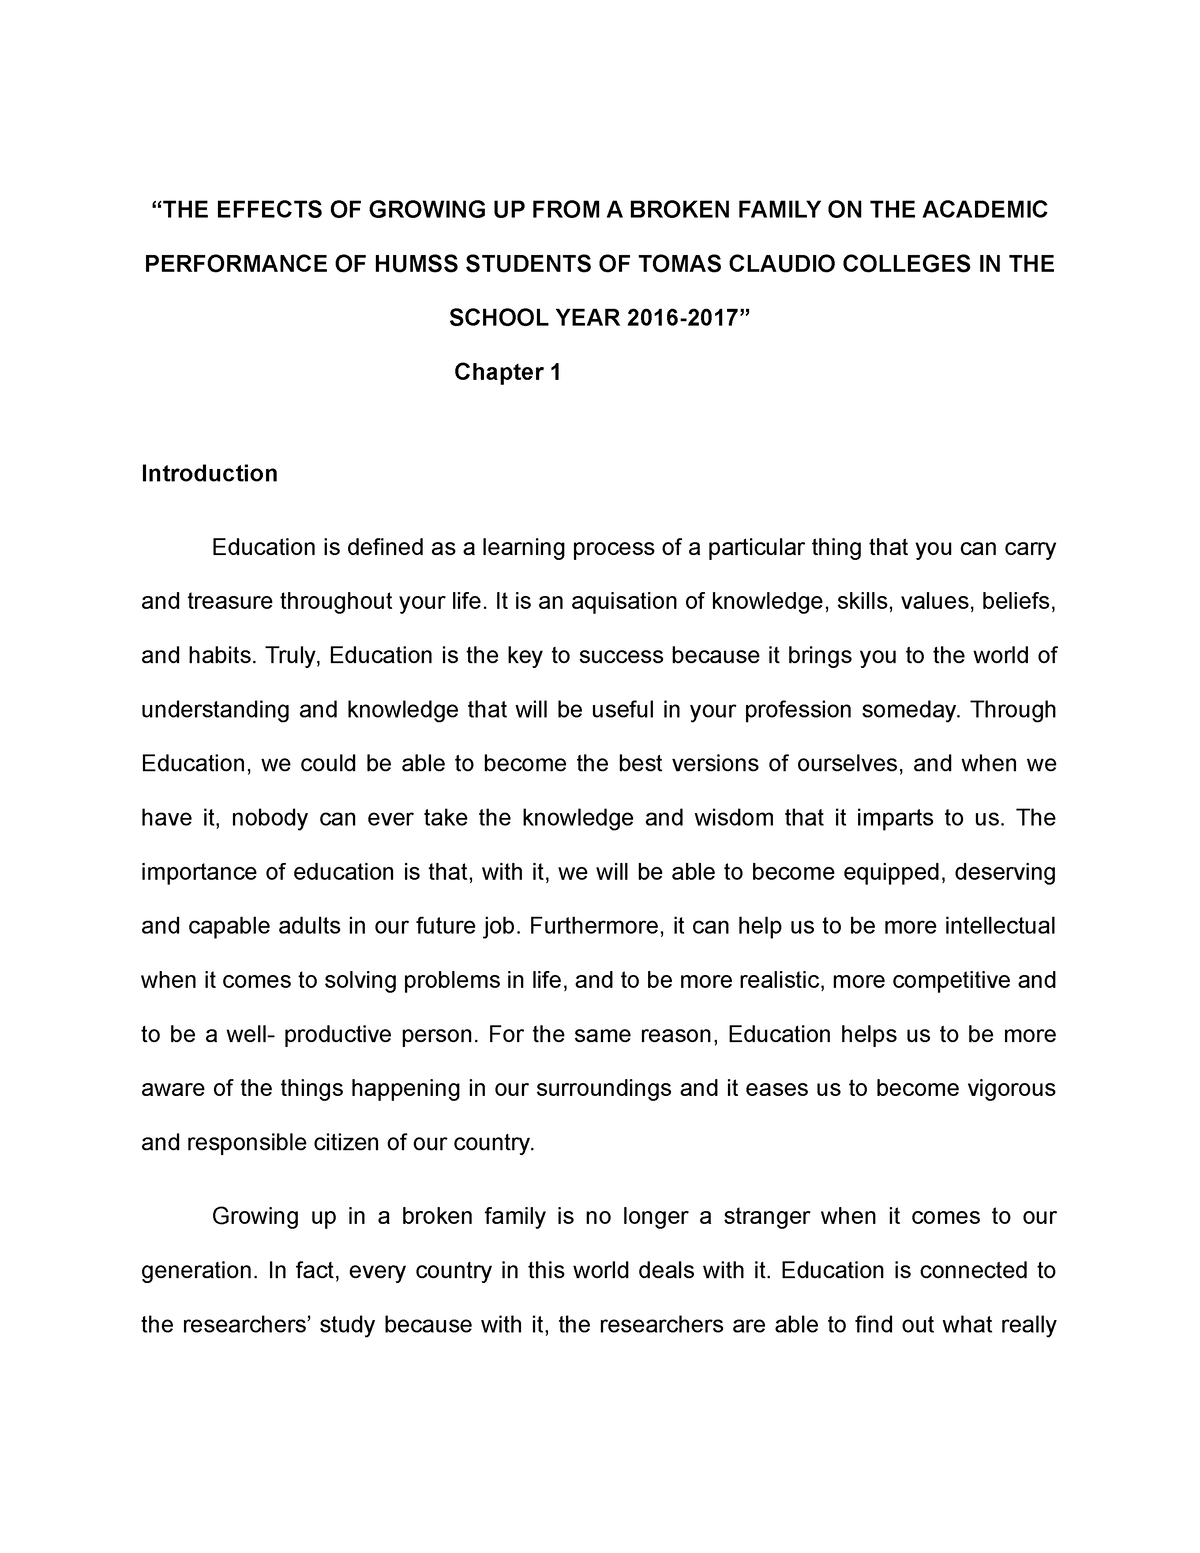 research paper related to humss pdf